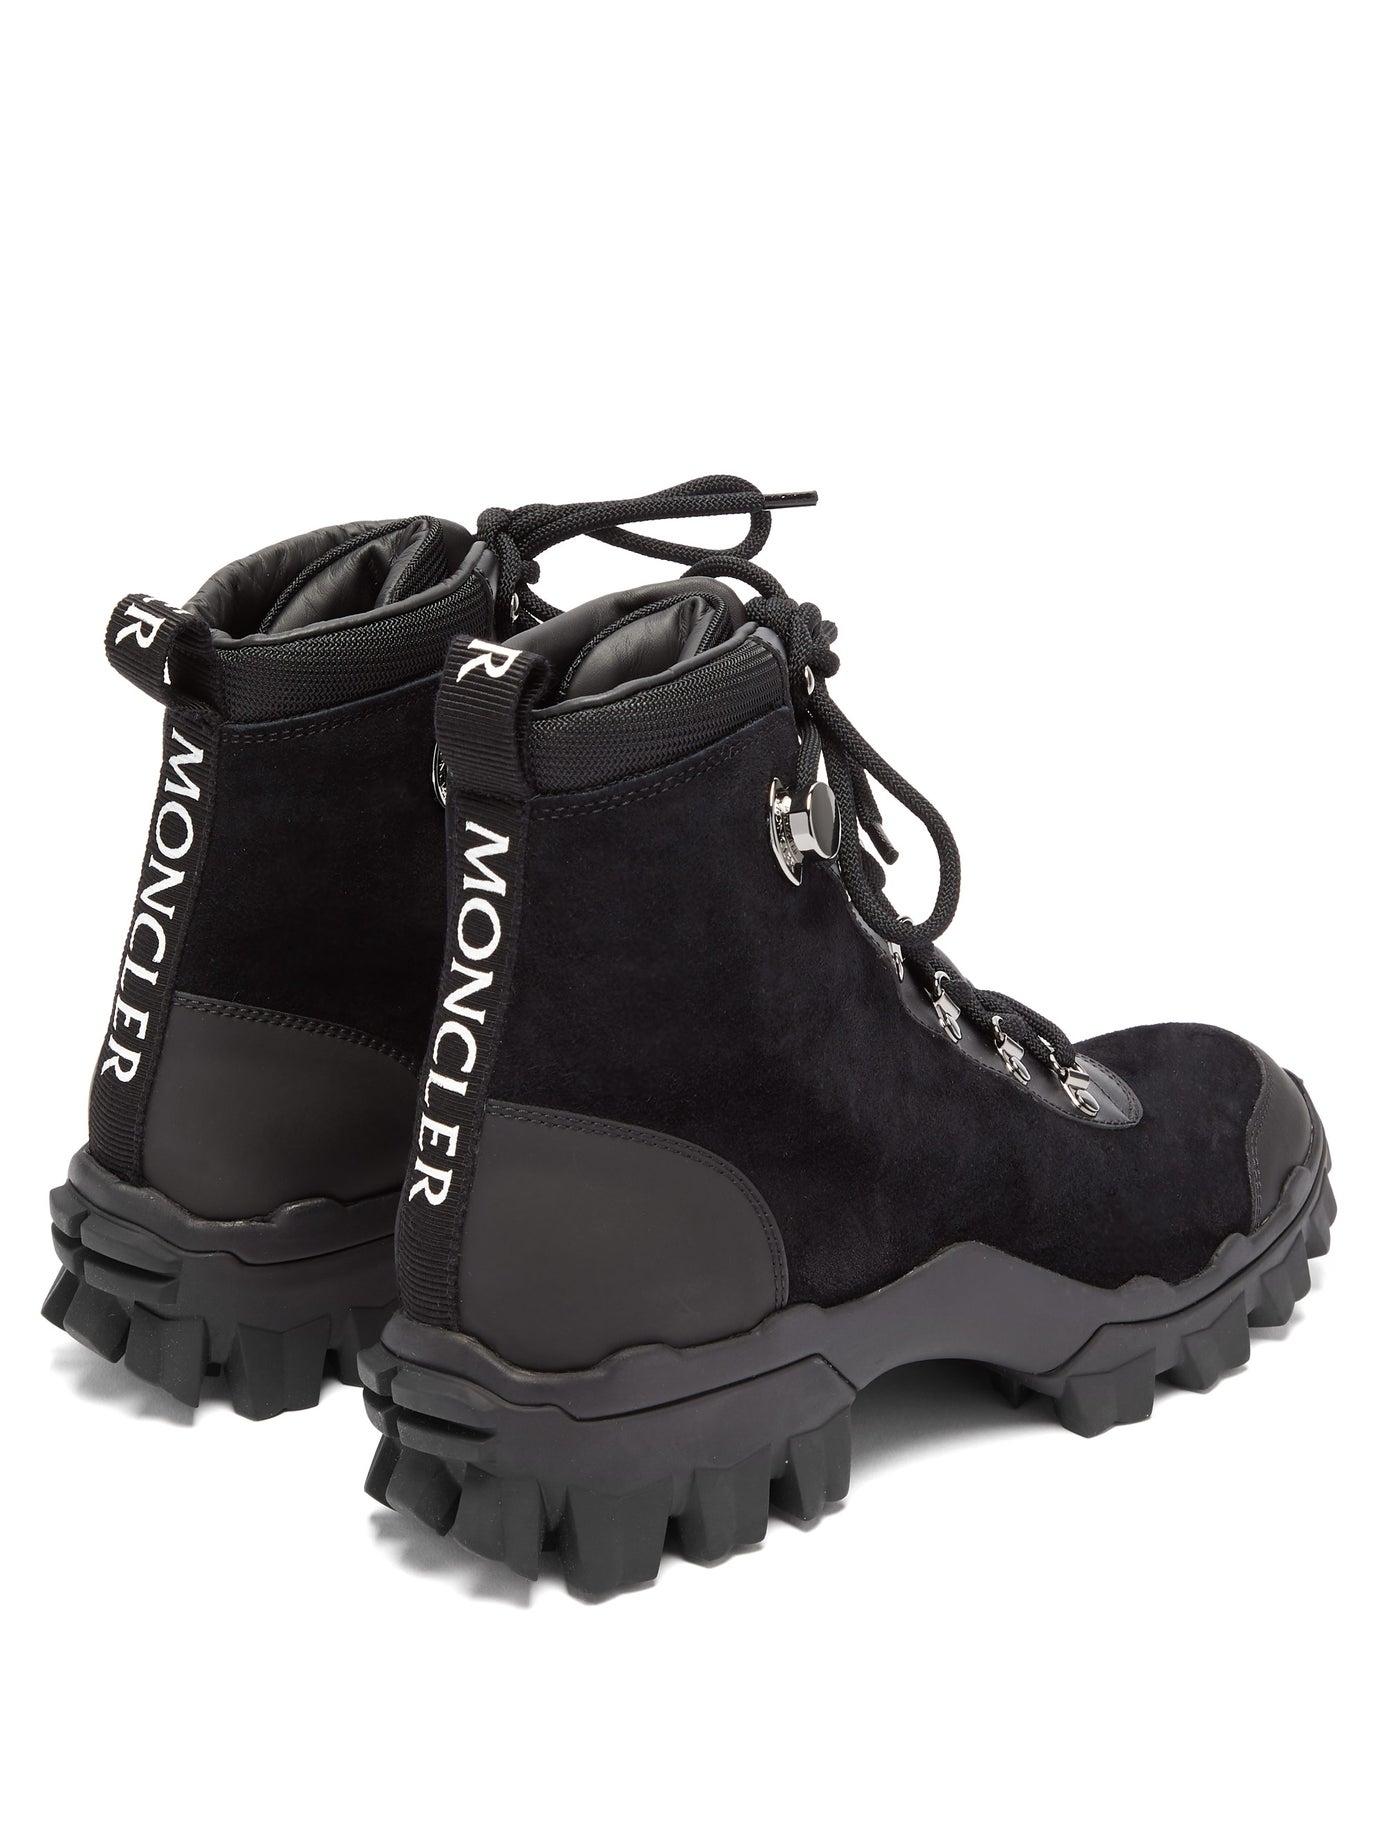 Moncler Helis Suede Ankle Boots in Black - Lyst